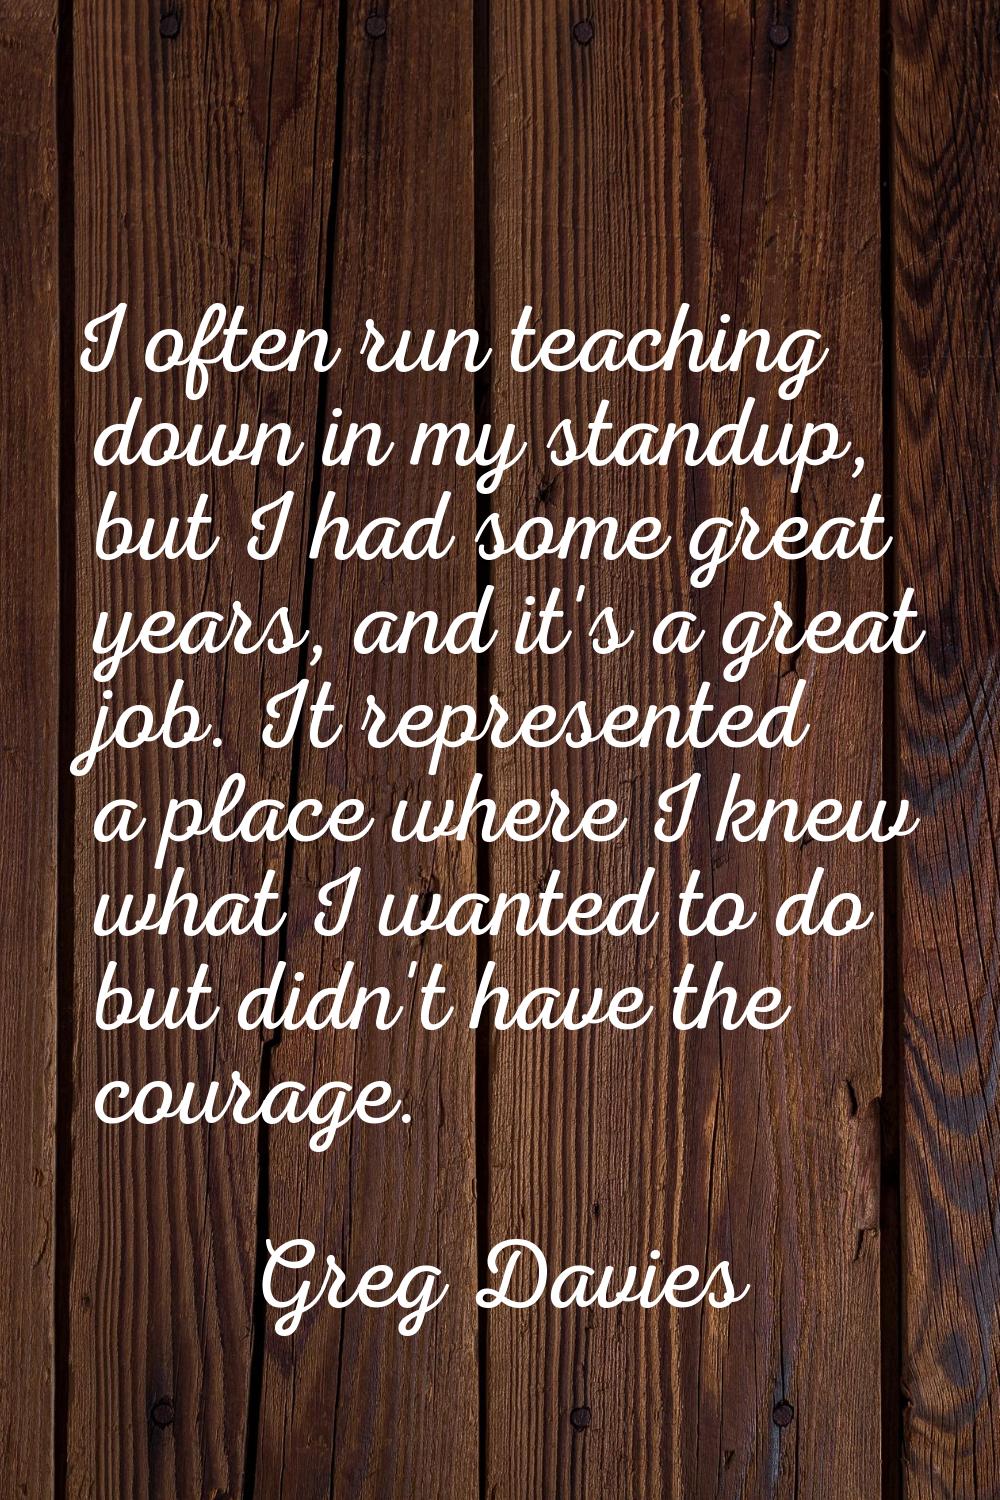 I often run teaching down in my standup, but I had some great years, and it's a great job. It repre